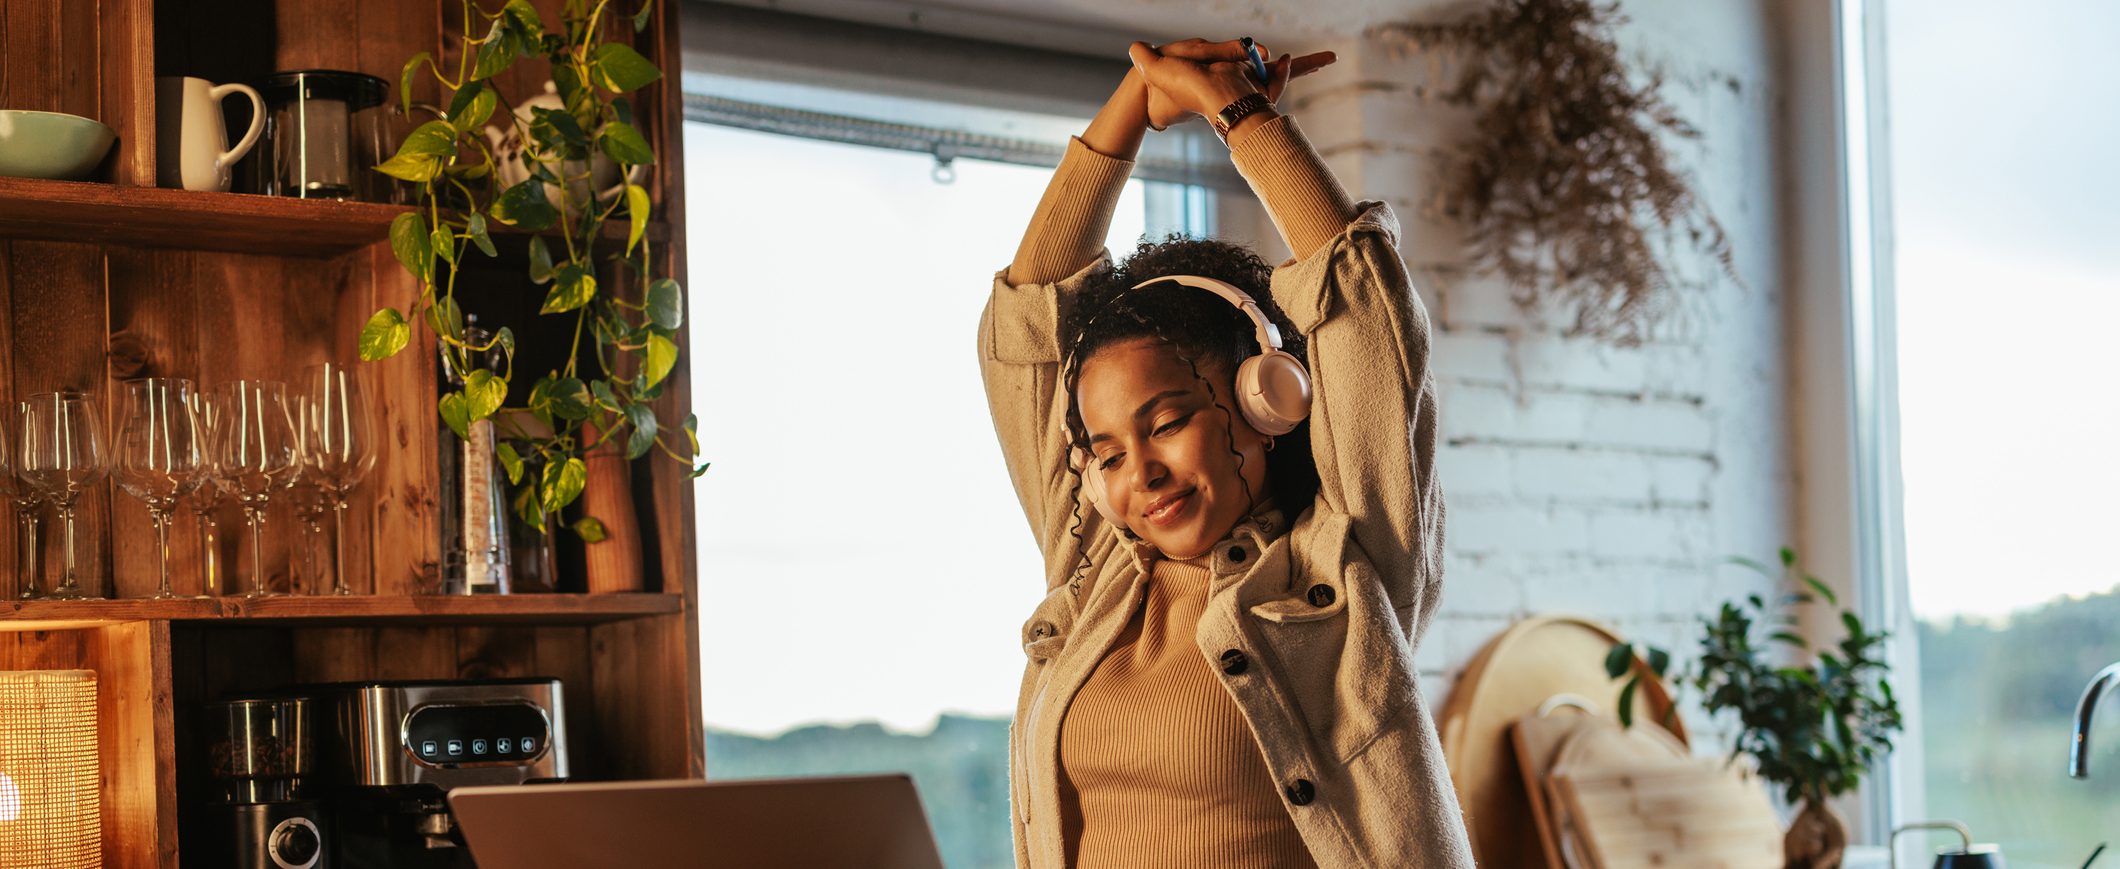 While working at a laptop computer, a woman wearing headphones stretches her arms over her head.